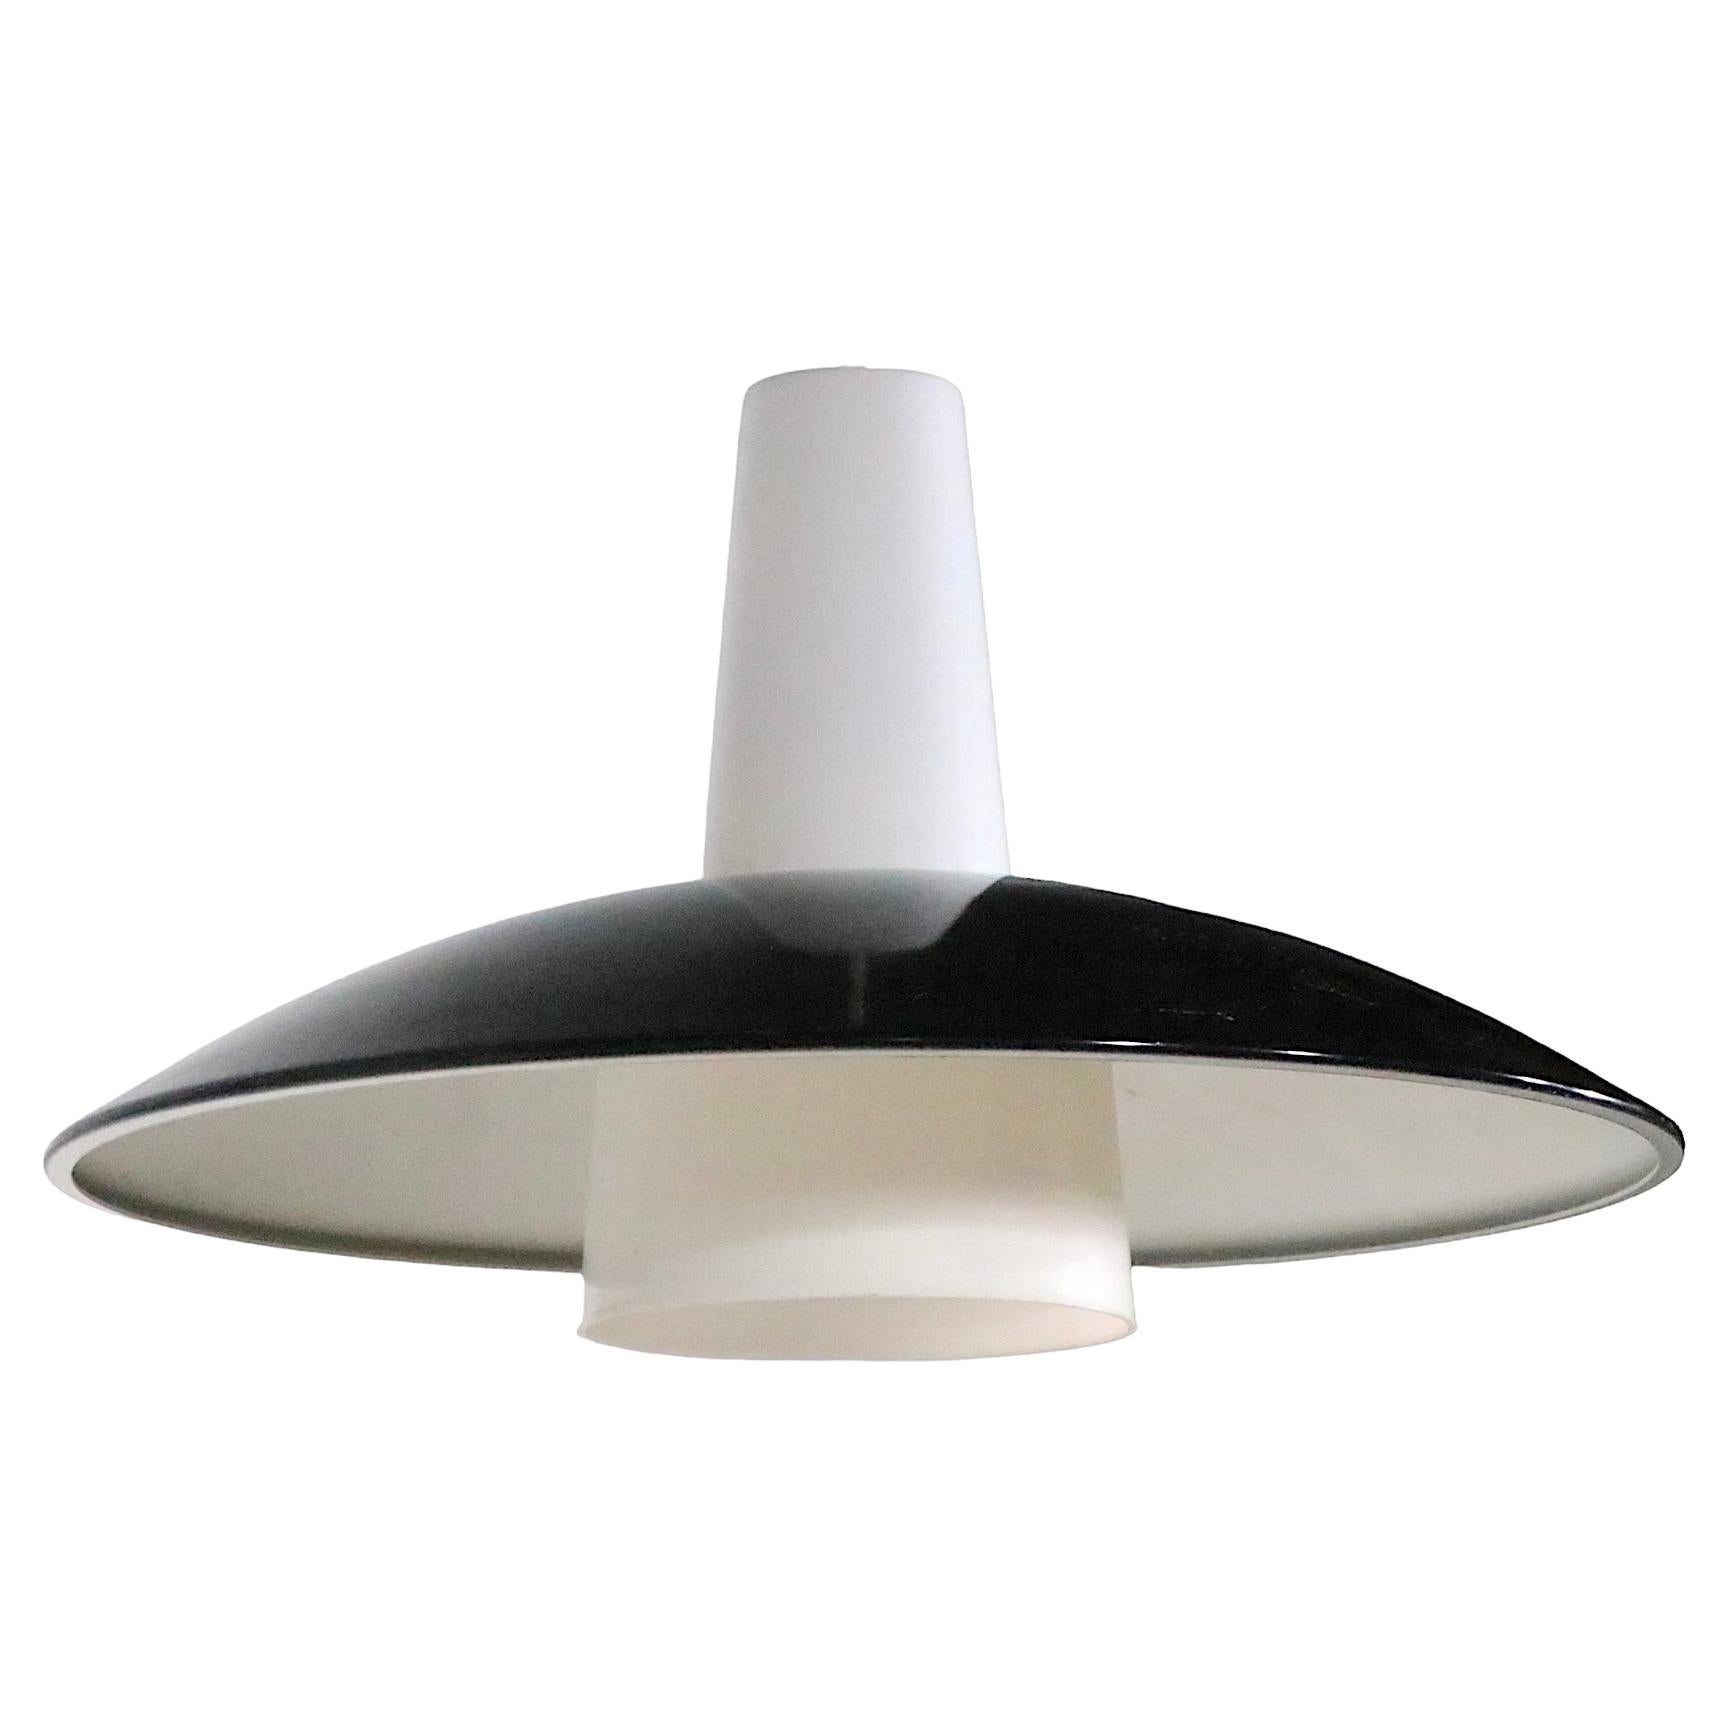 Chic architectural pendant chandelier(s) originally from the landmark SUNY Albany campus, which was designed in 1962 by Edward Durell Stone. The fixture features a domed disk shade, having a black top with a white interior bottom. The  metal shade